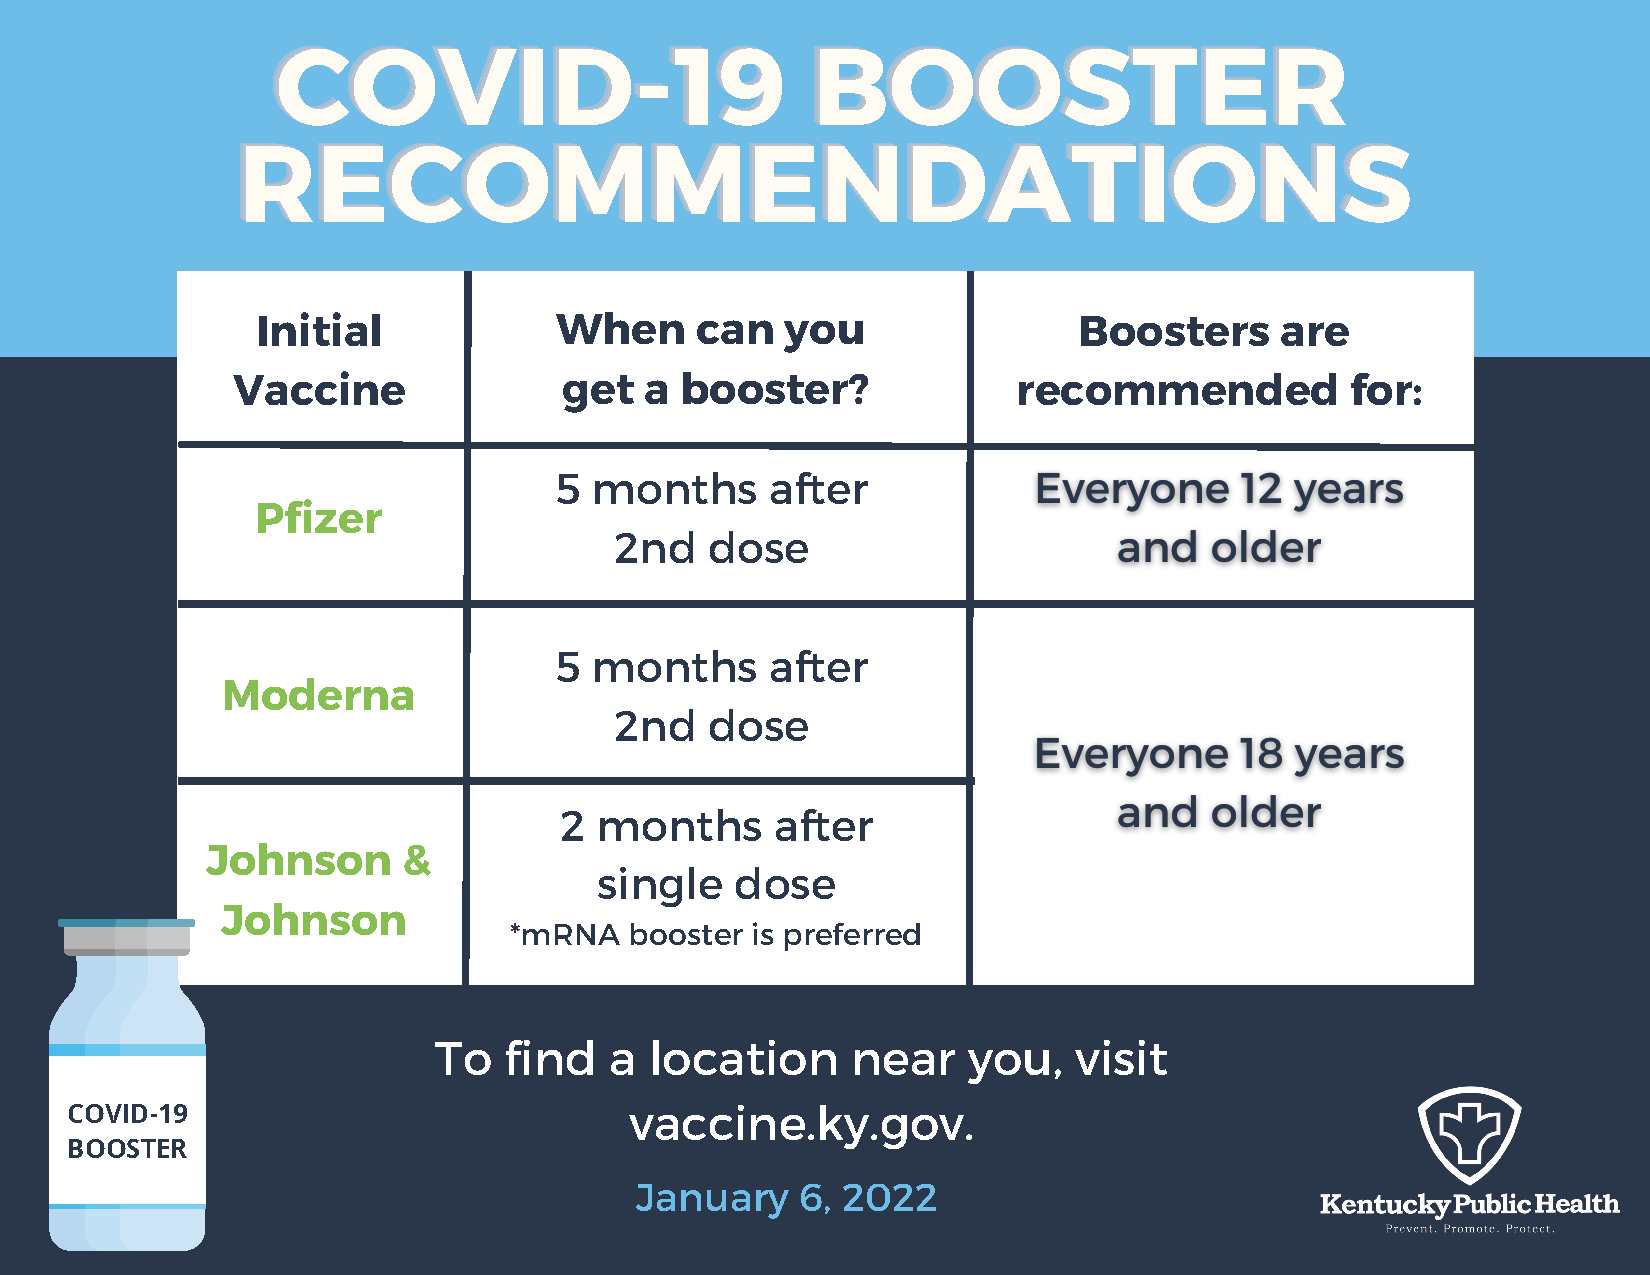 Covid-19 Booster Recommendations